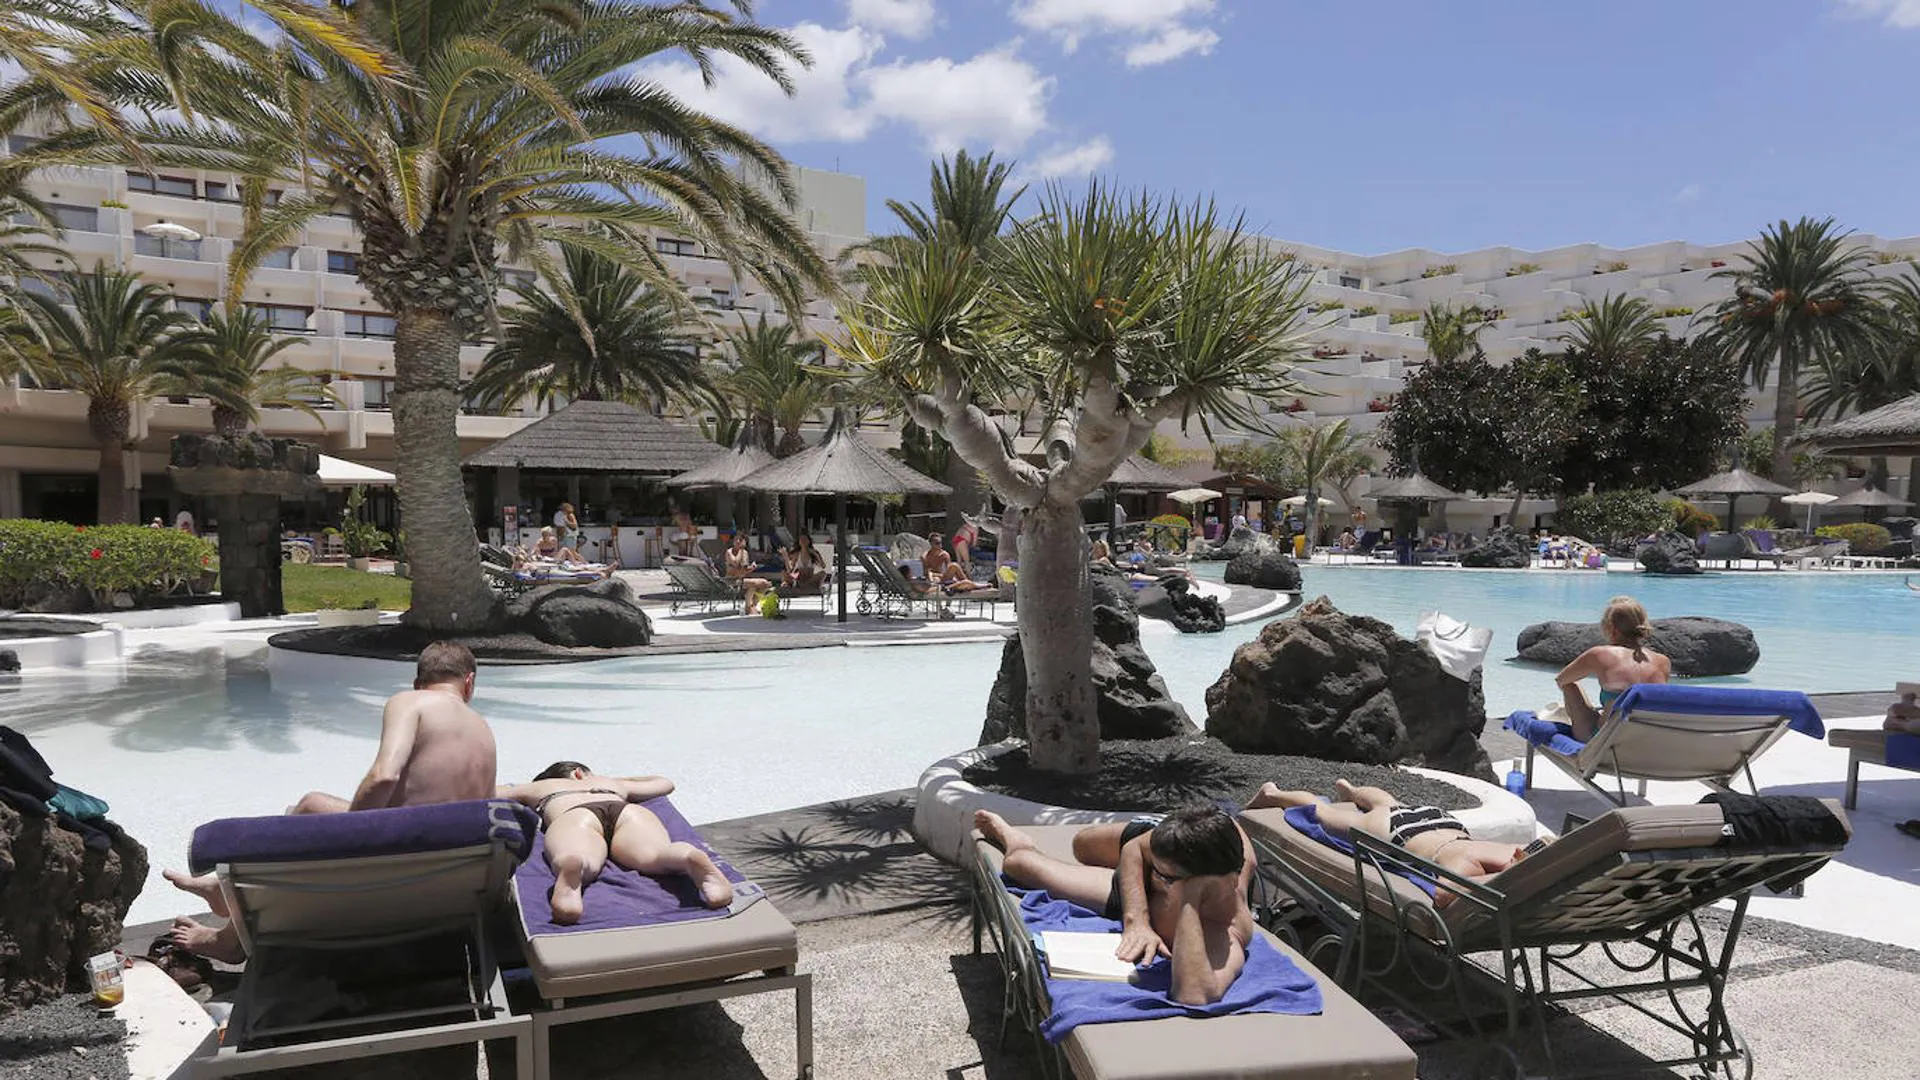 The Canary Islands hotel sector is "very optimistic" for winter after the closure of a great summer